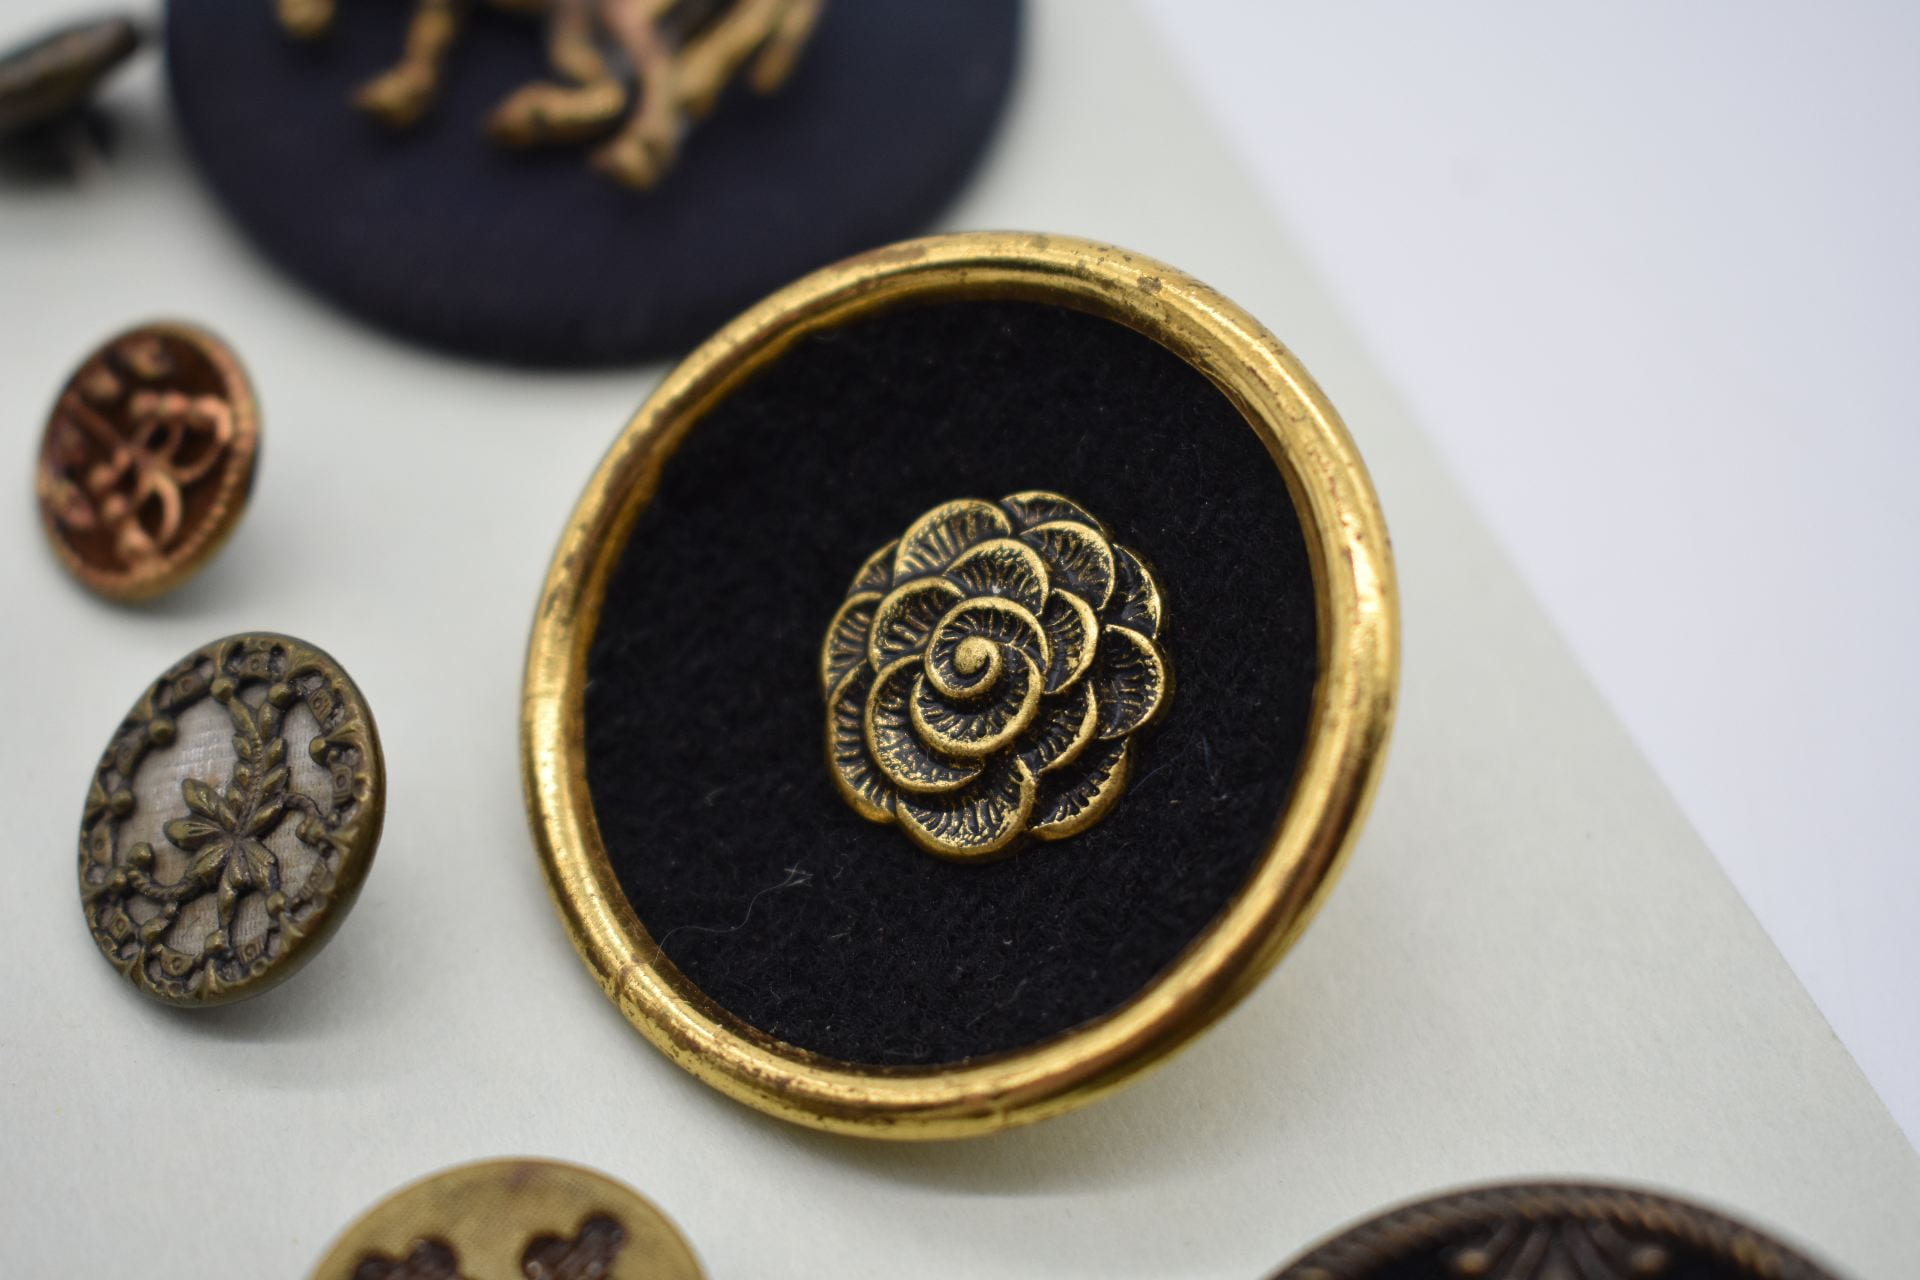 A large black and round button edged in gold with a golden flower at the center.